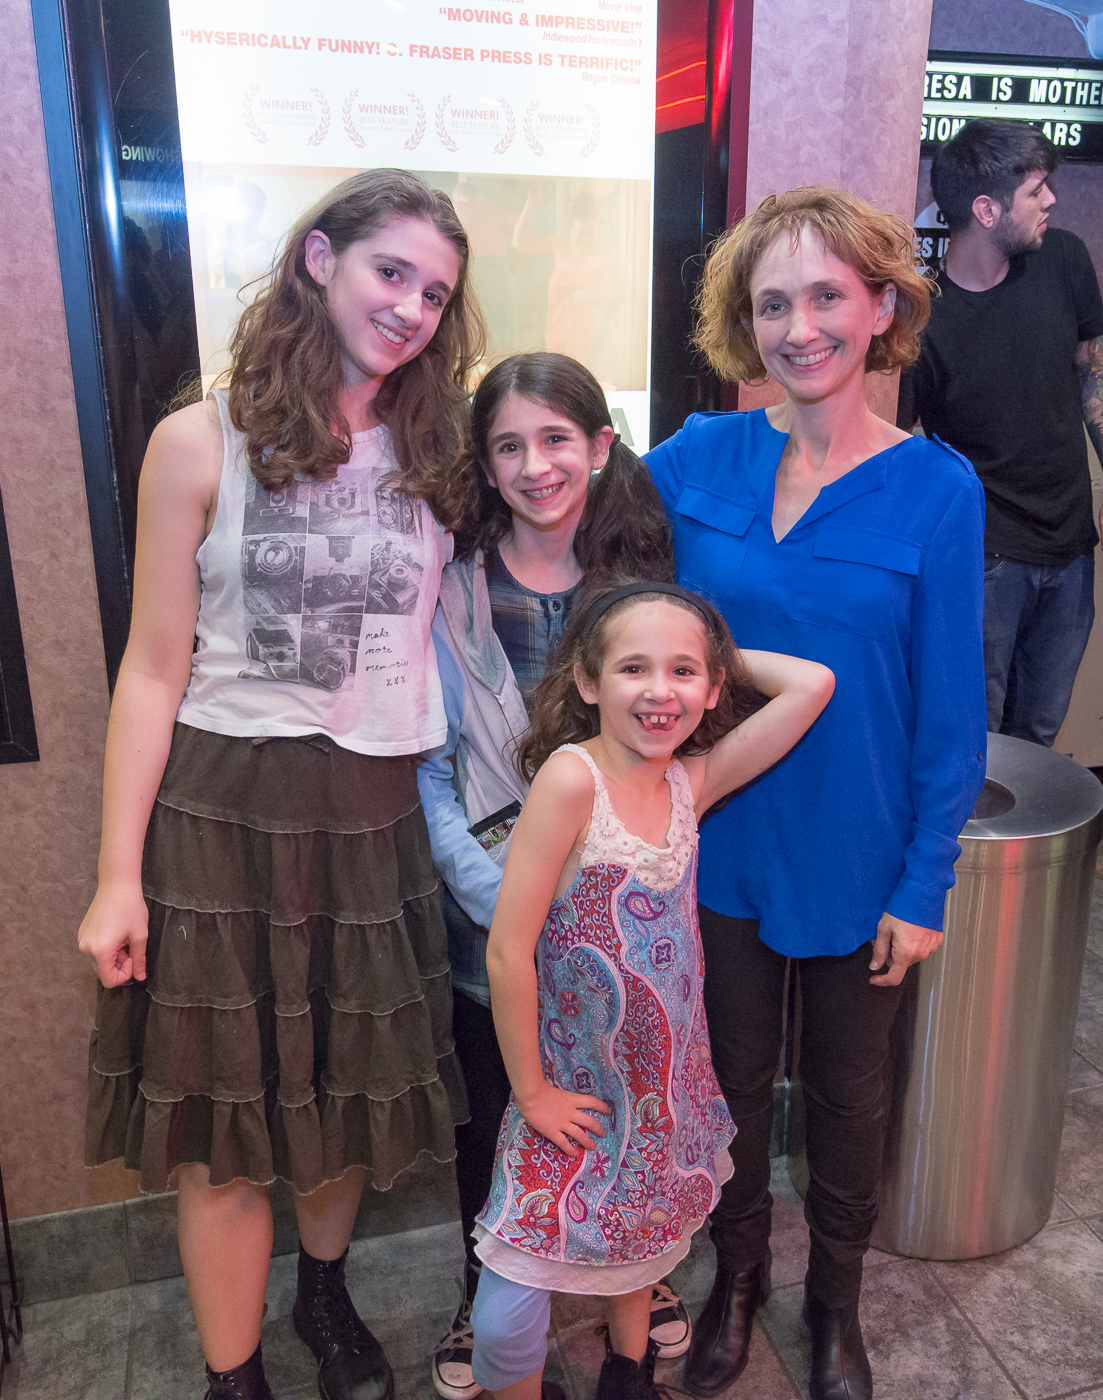 Schuyler Press, Maeve Press, Amaya Press & C. Fraser Press at the Theresa Is a Mother NYC premiere